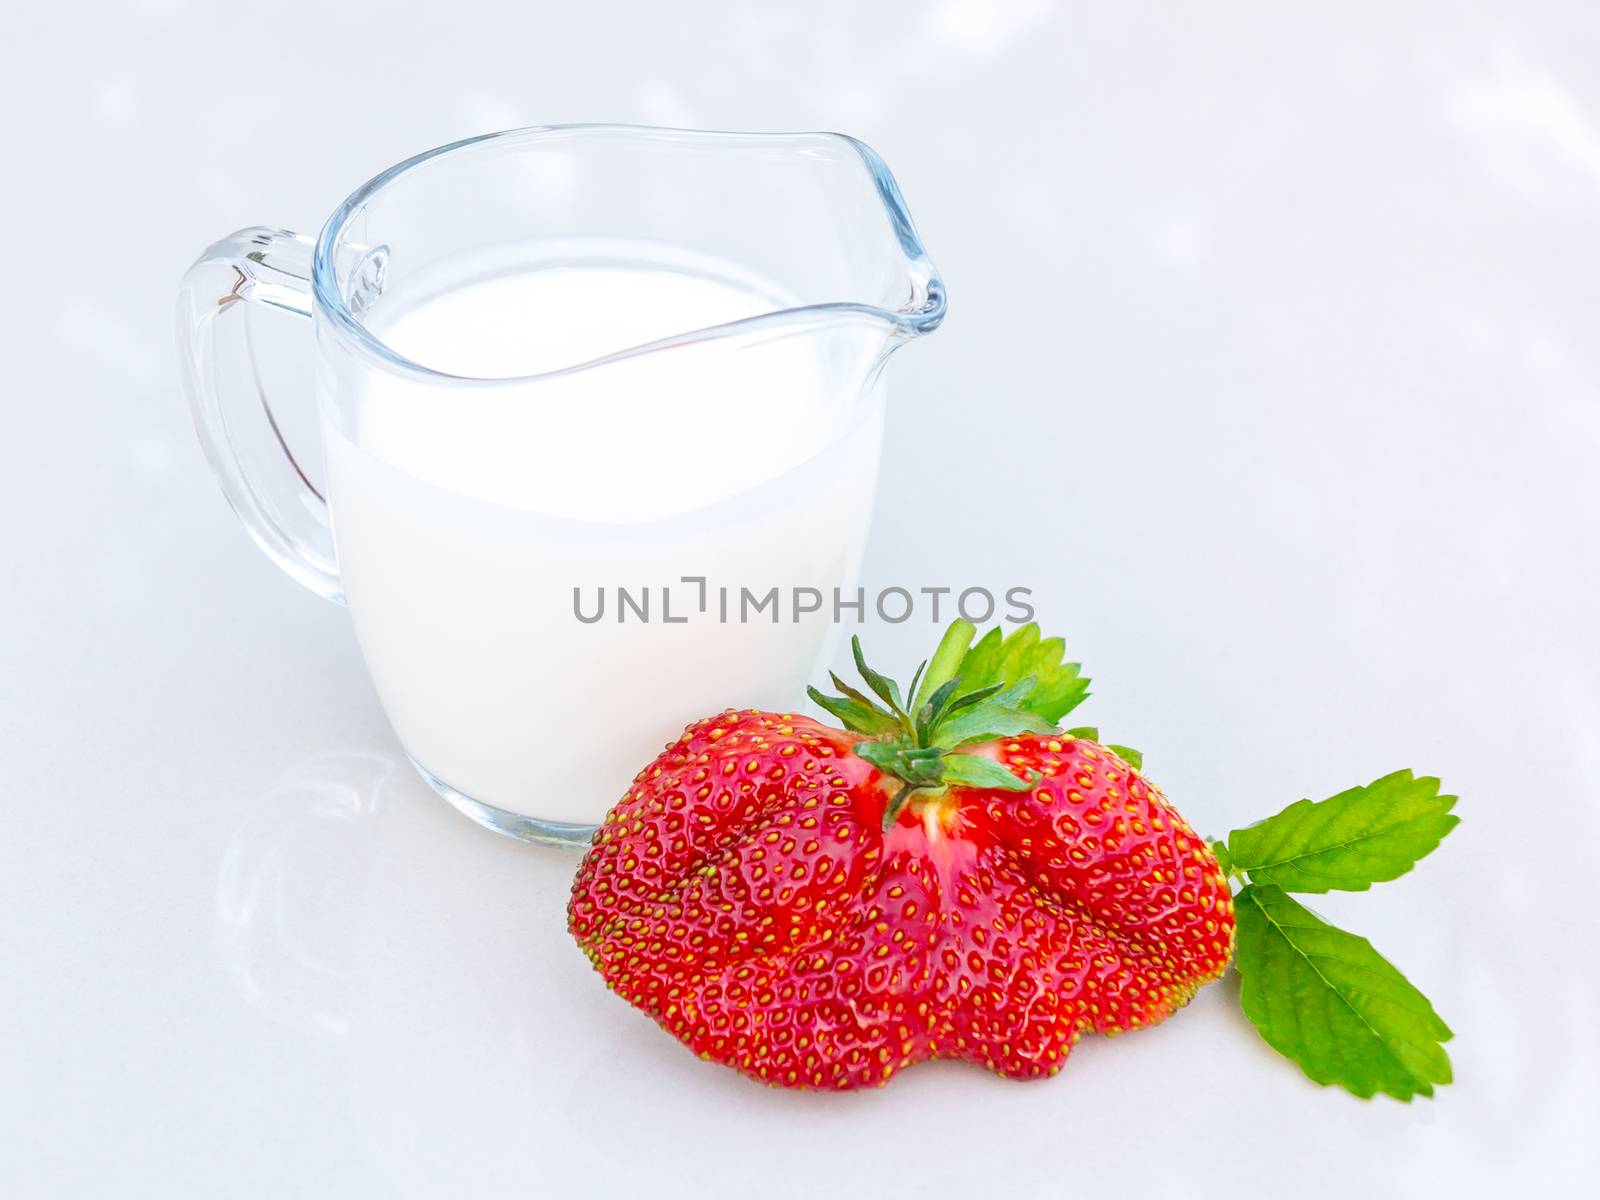 A huge ripe strawberry and cream sauce on the table on a bright table by galsand